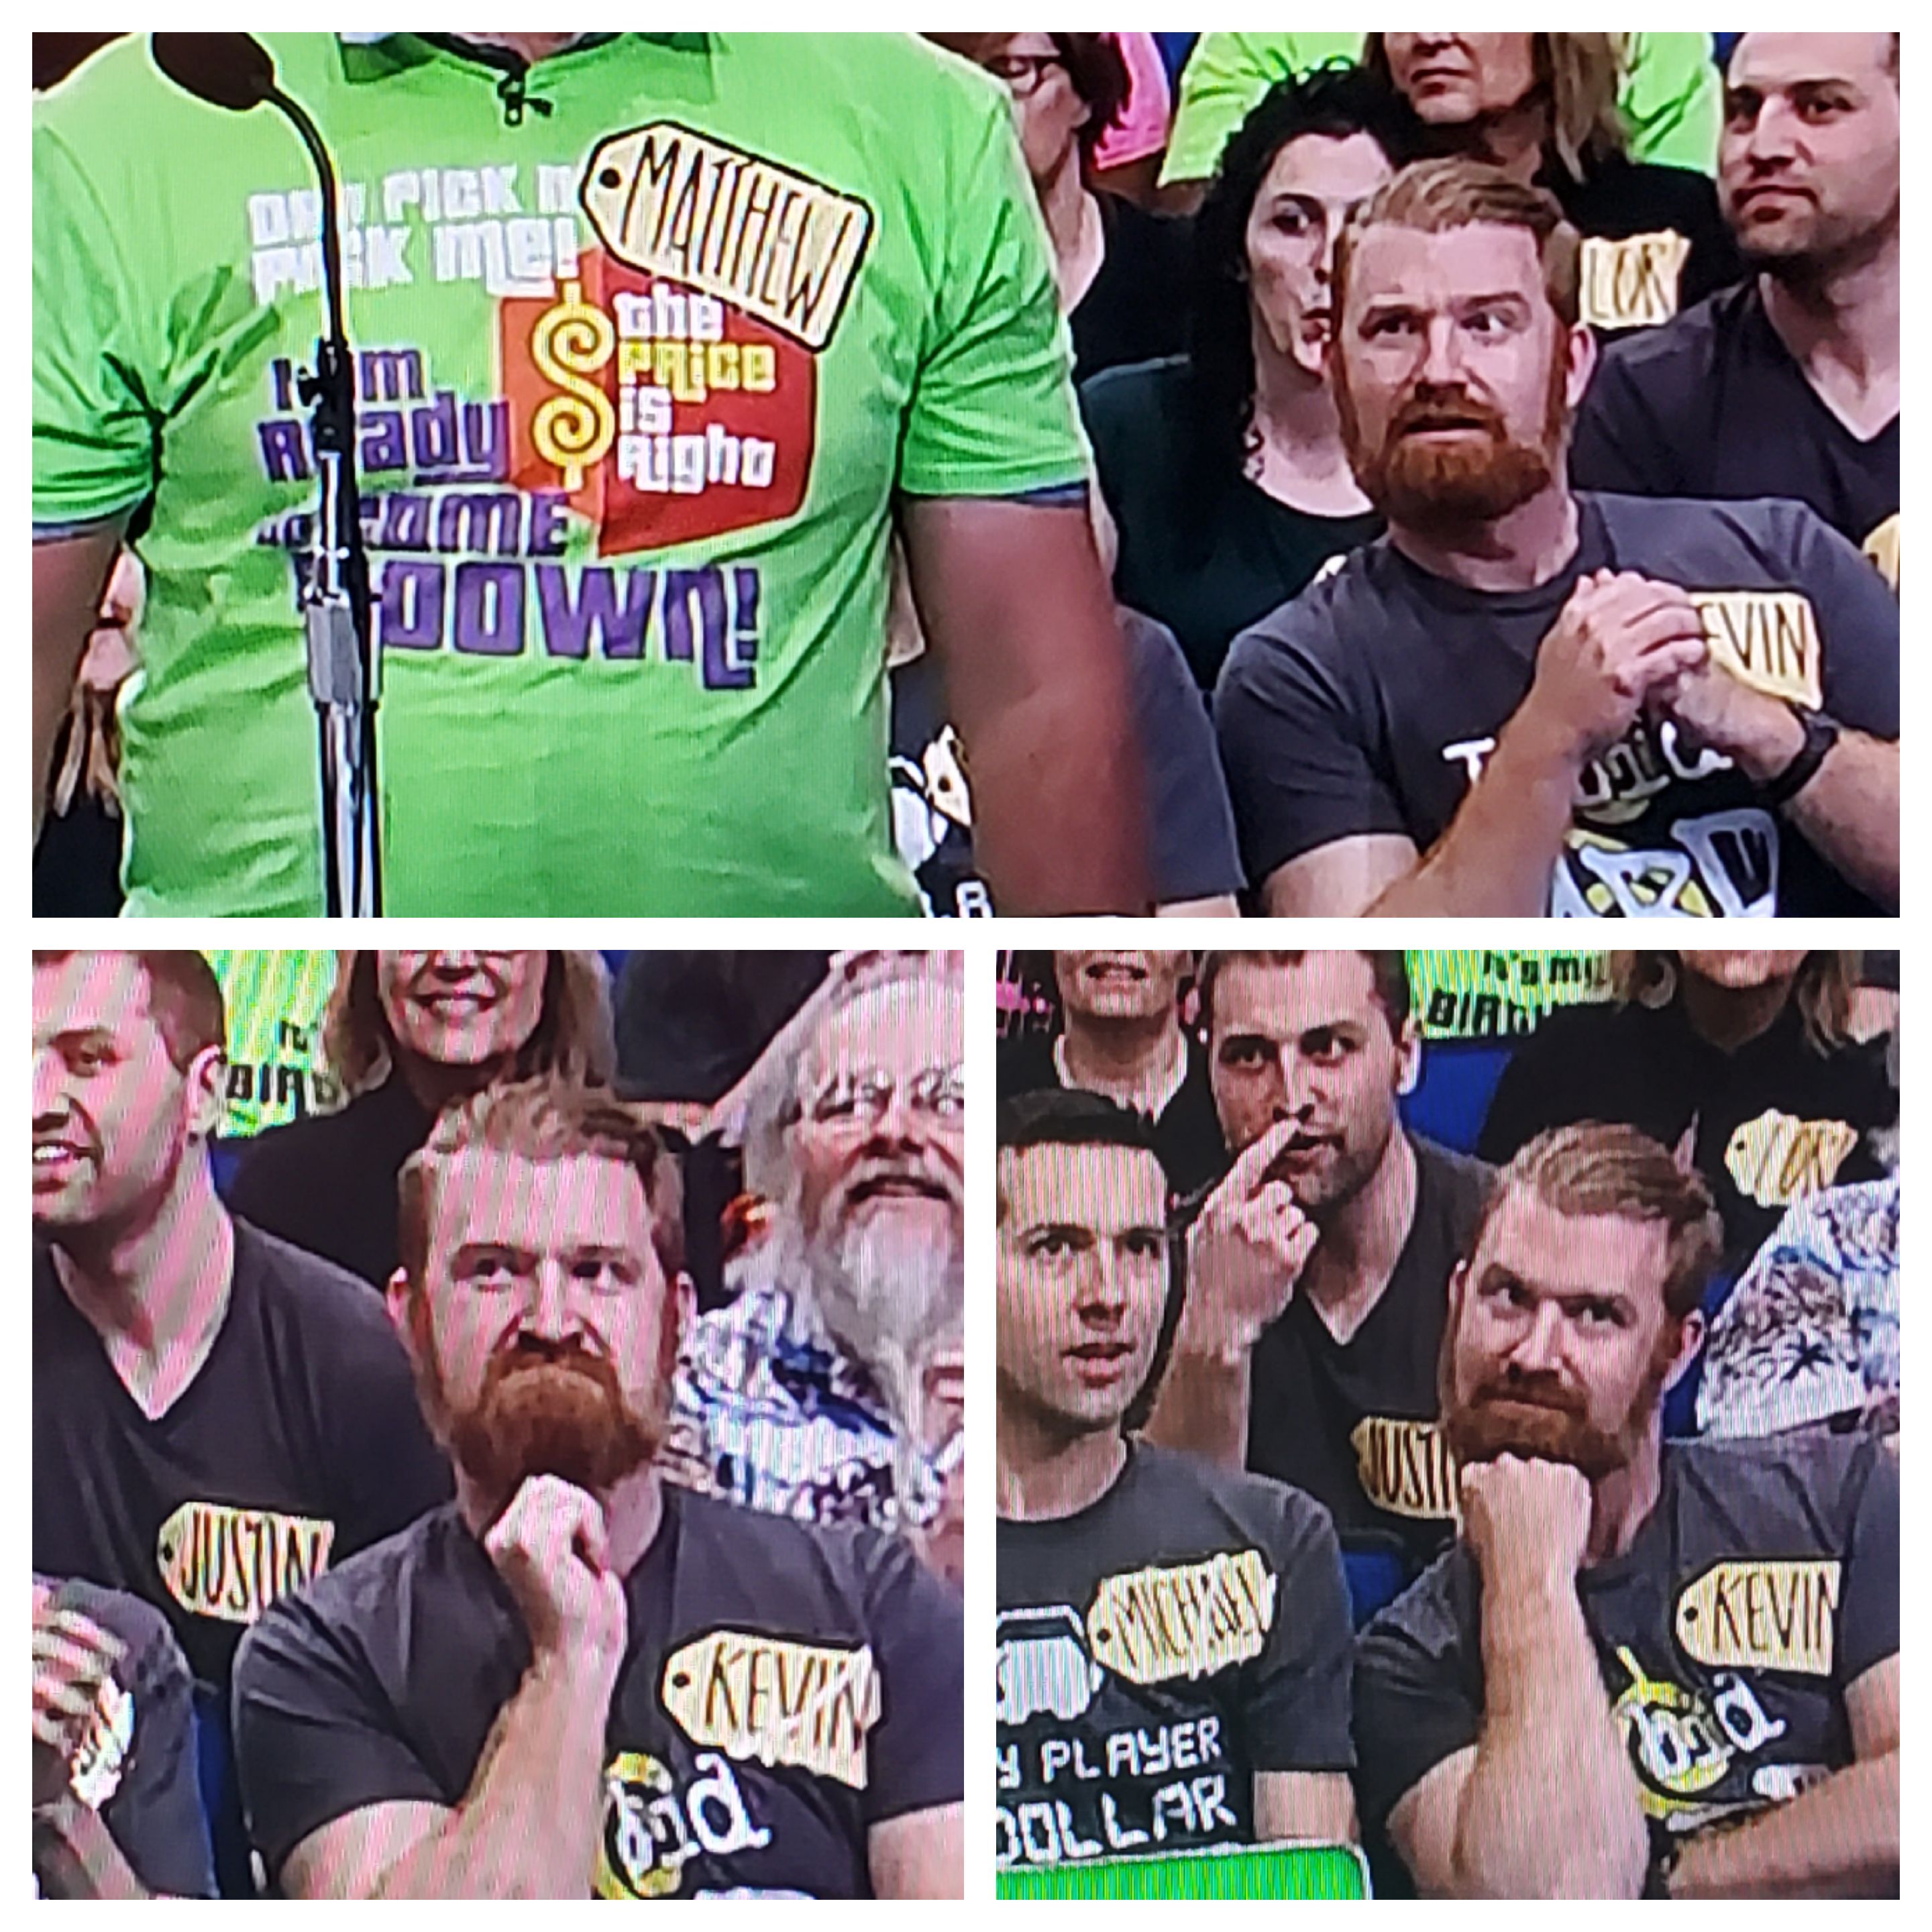 Exactly 3 years ago, I was on Price is Right and made ridiculous faces for the entire show